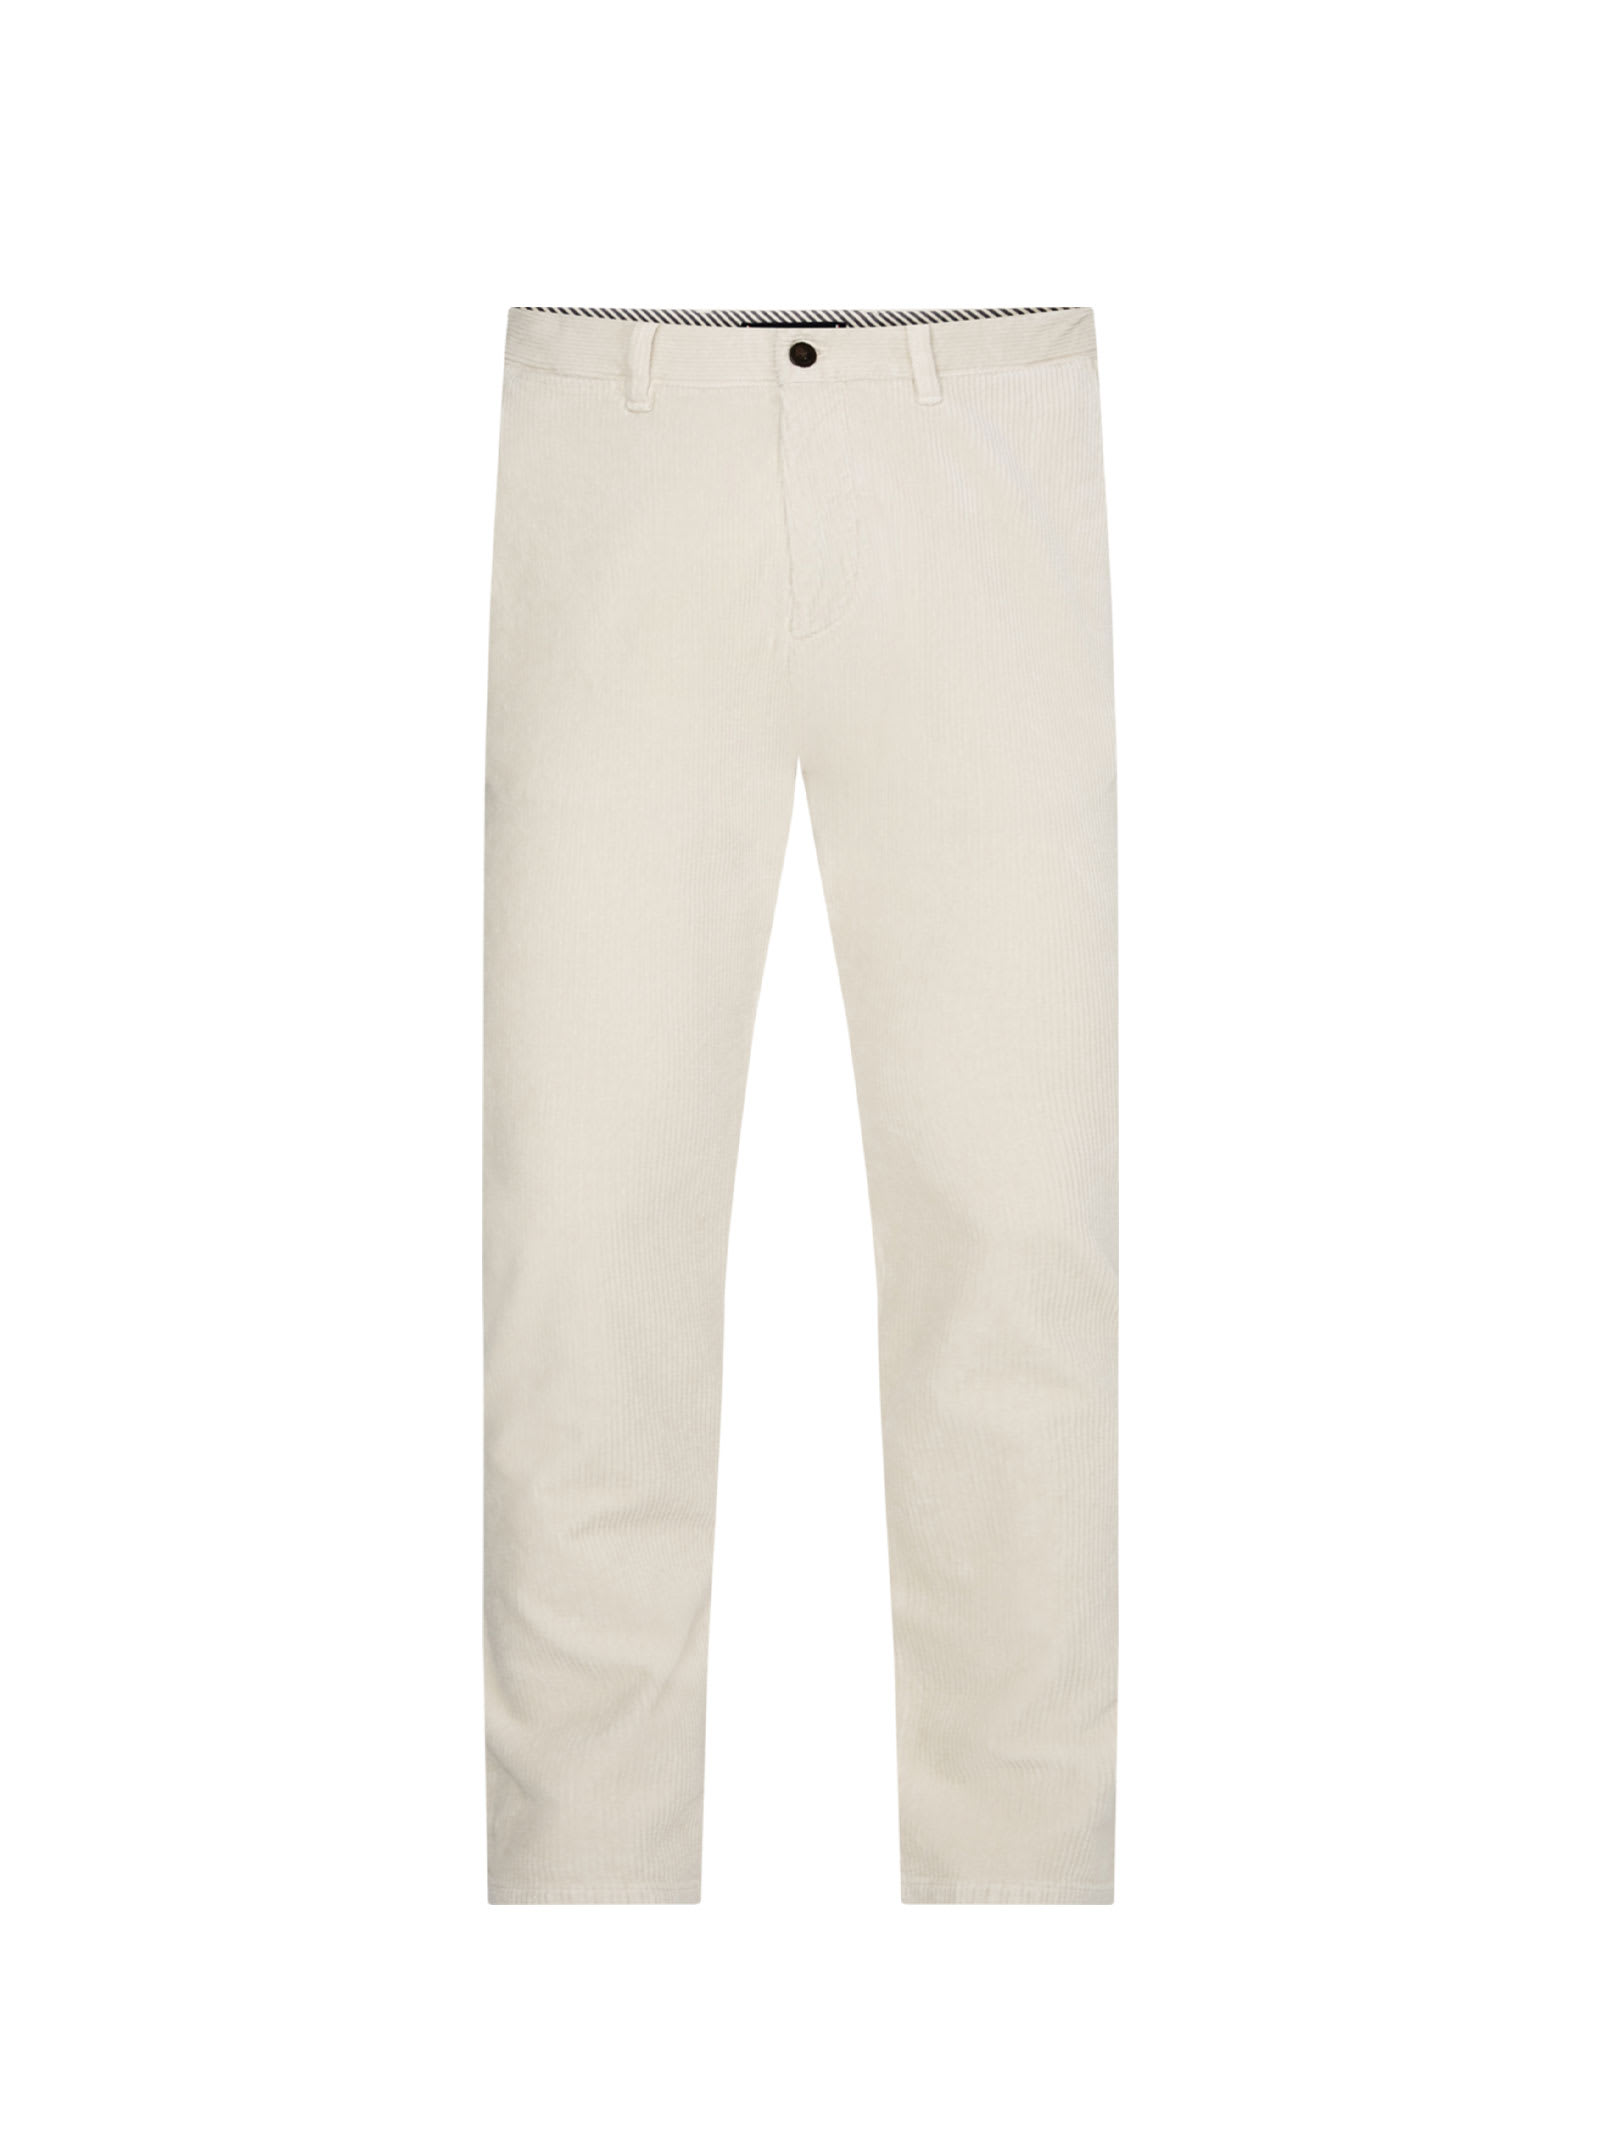 Tommy Hilfiger Chino Pants In Cotton